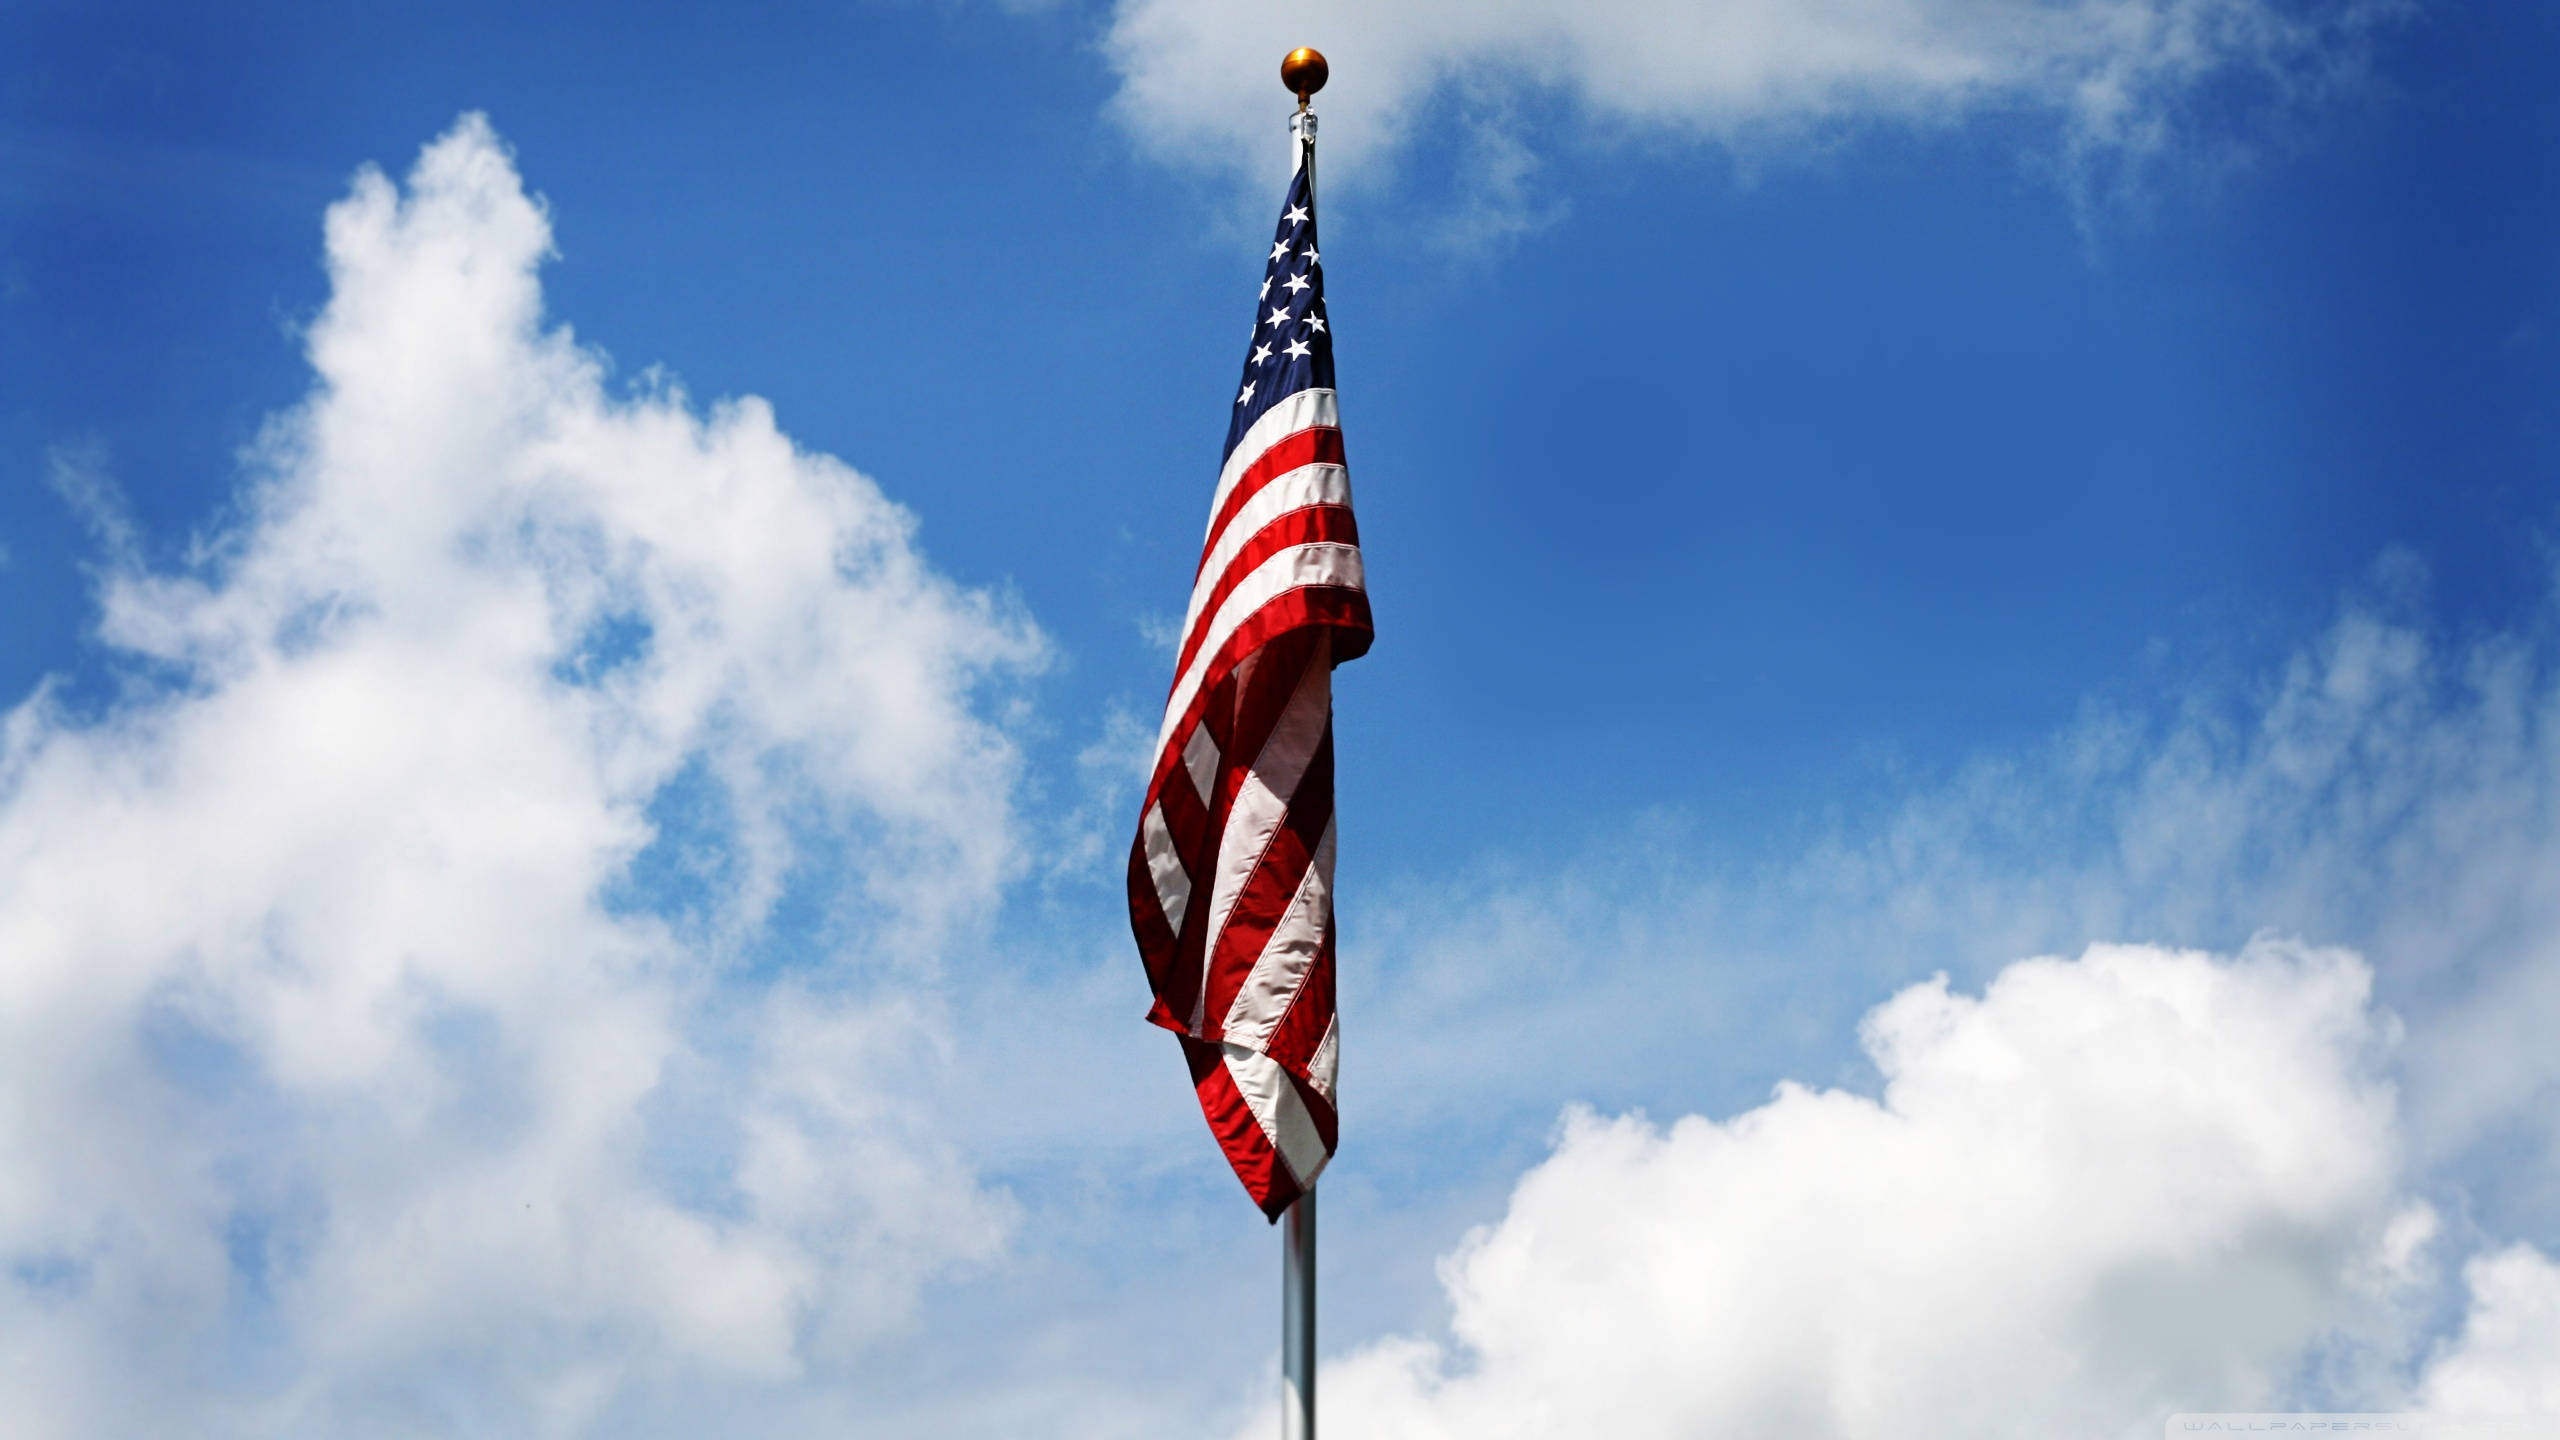 American Flag Hd On Clear Day Wallpaper